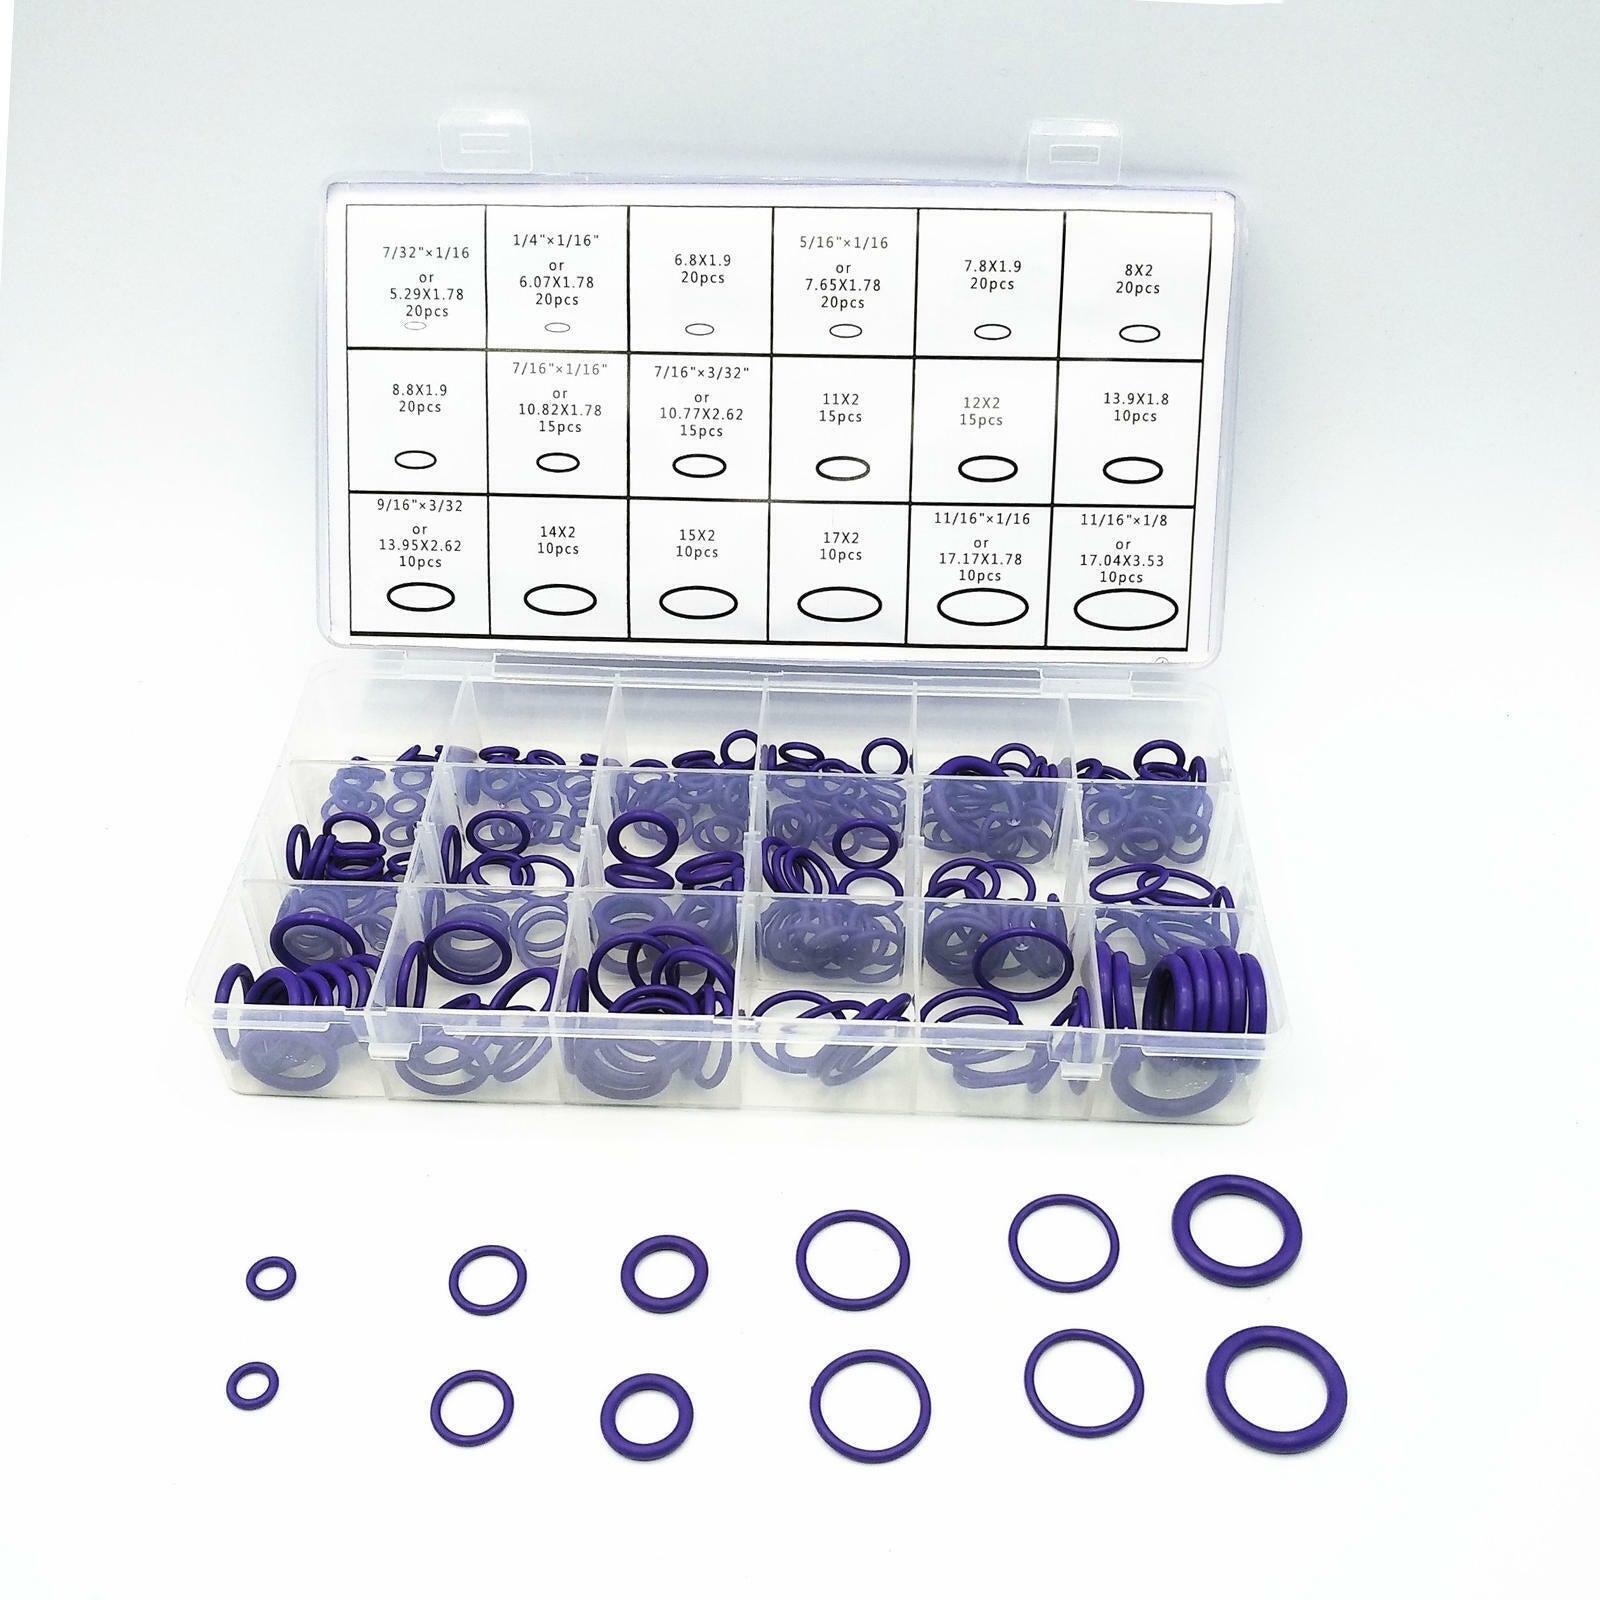 270 Purple O Ring Assortment Kit - South East Clearance Centre